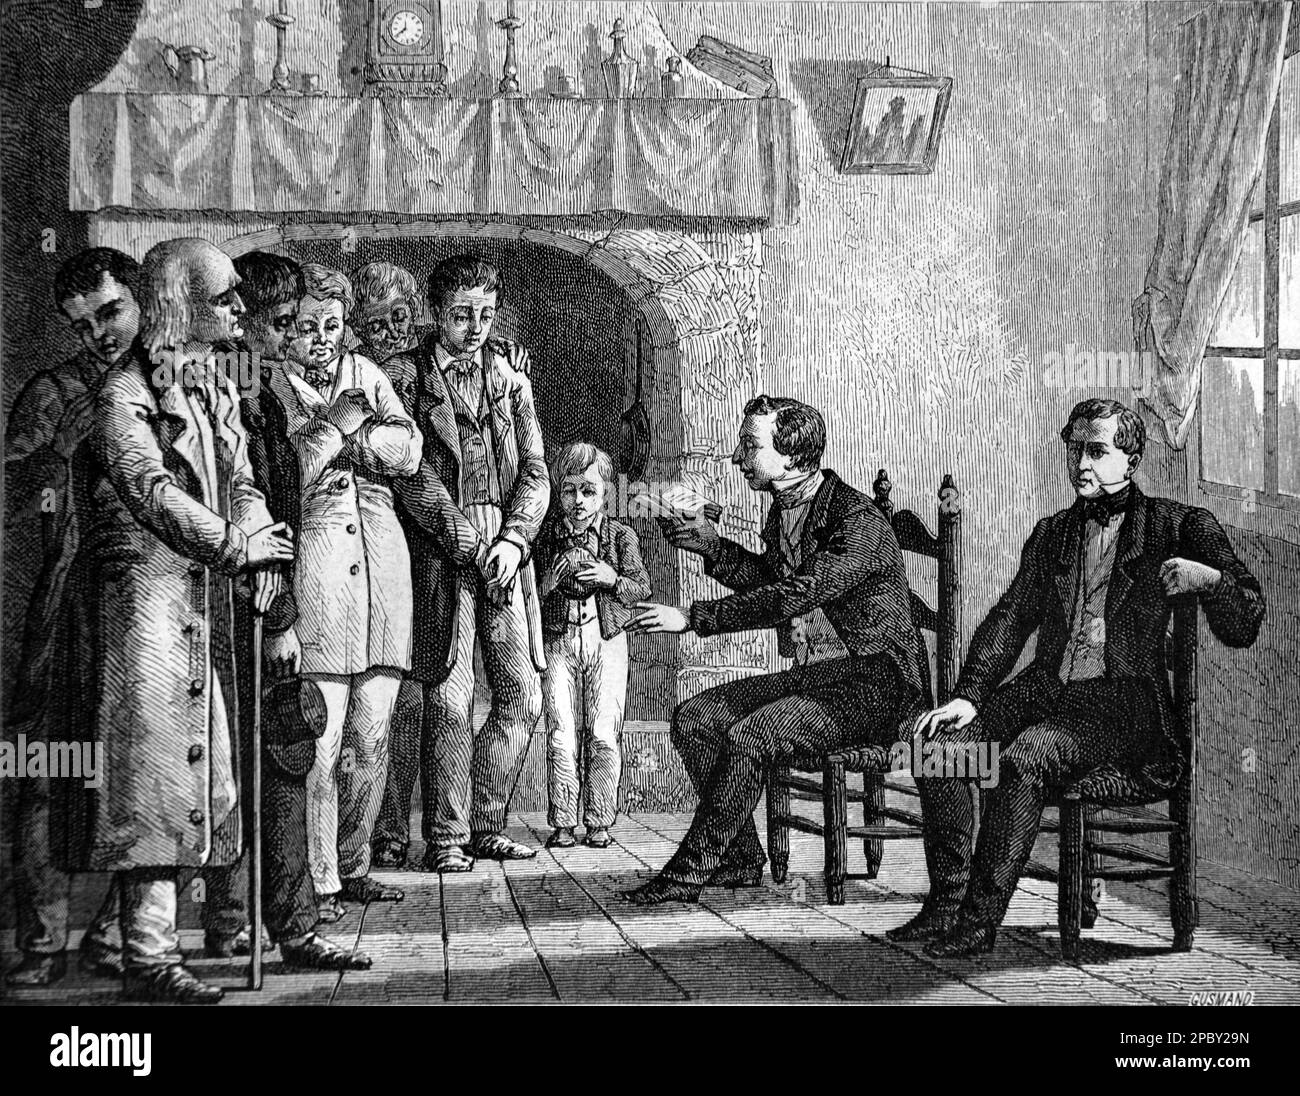 Joseph Smith (1805-1844) Founder & First President (1830-1844) of the Church of Jesus Christ Later-day Saints, Mormonism or LDC Movement Reading from the Book of Mormon. Vintage or Historic Engraving or Illustration 1862 Stock Photo